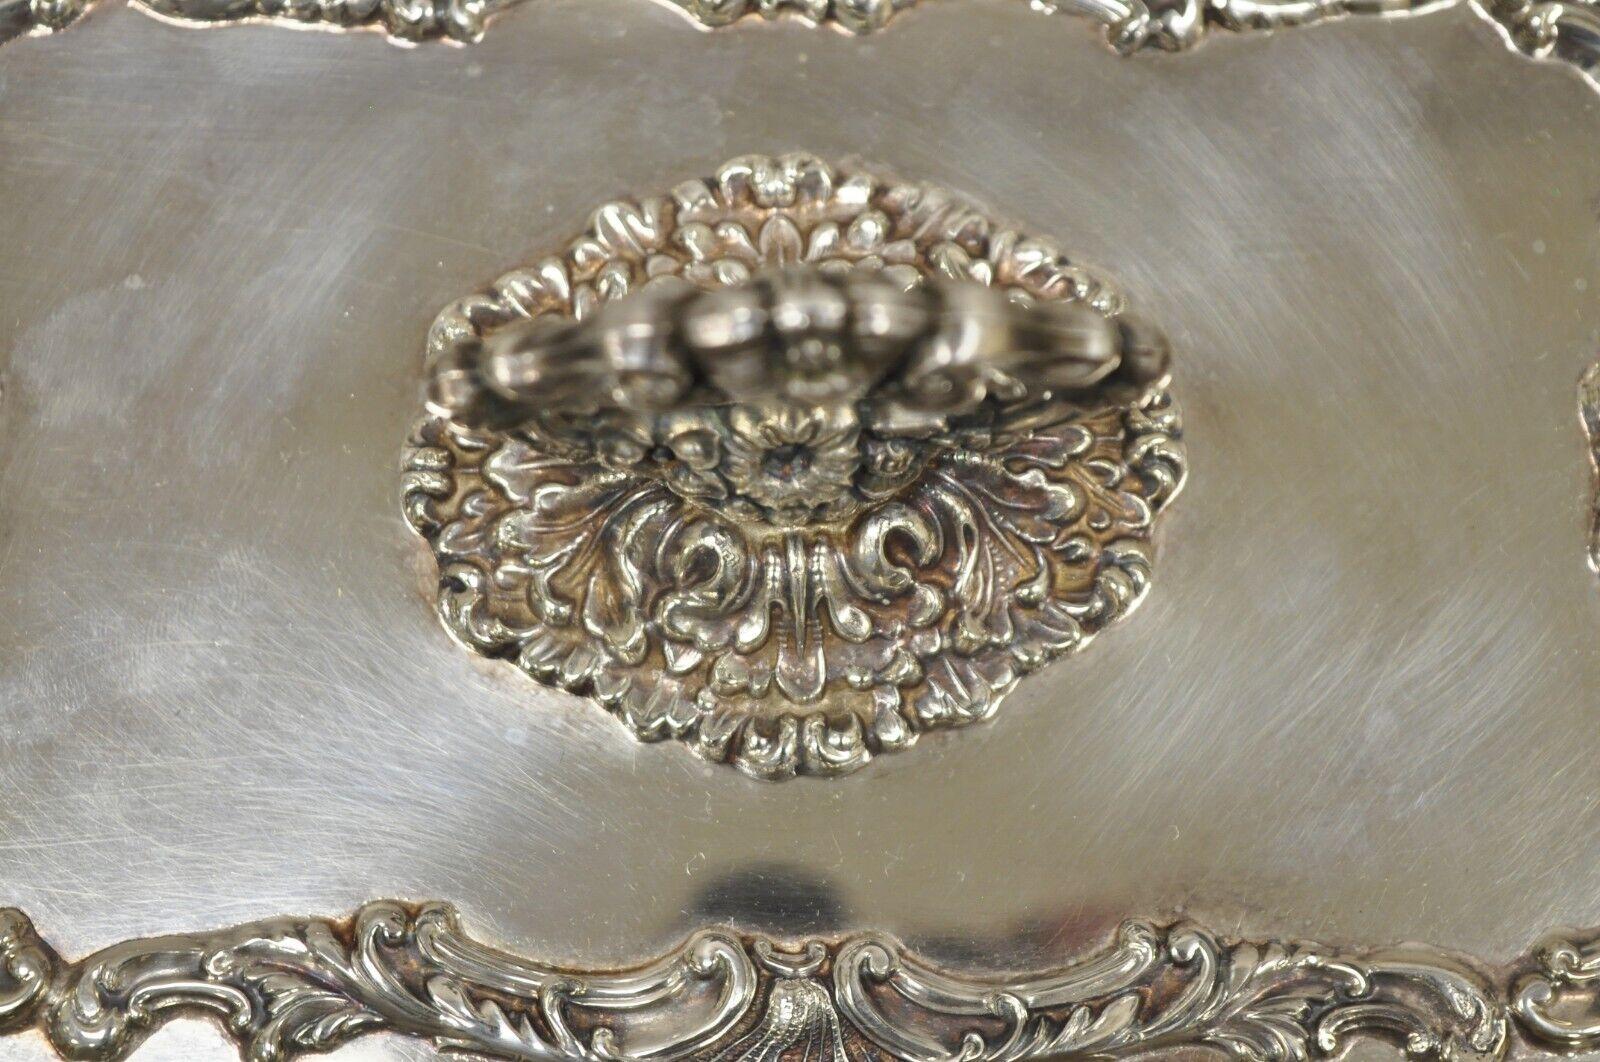 20th Century Vintage Regency Style Silver Plated Covered Vegetable Dish Serving Platter